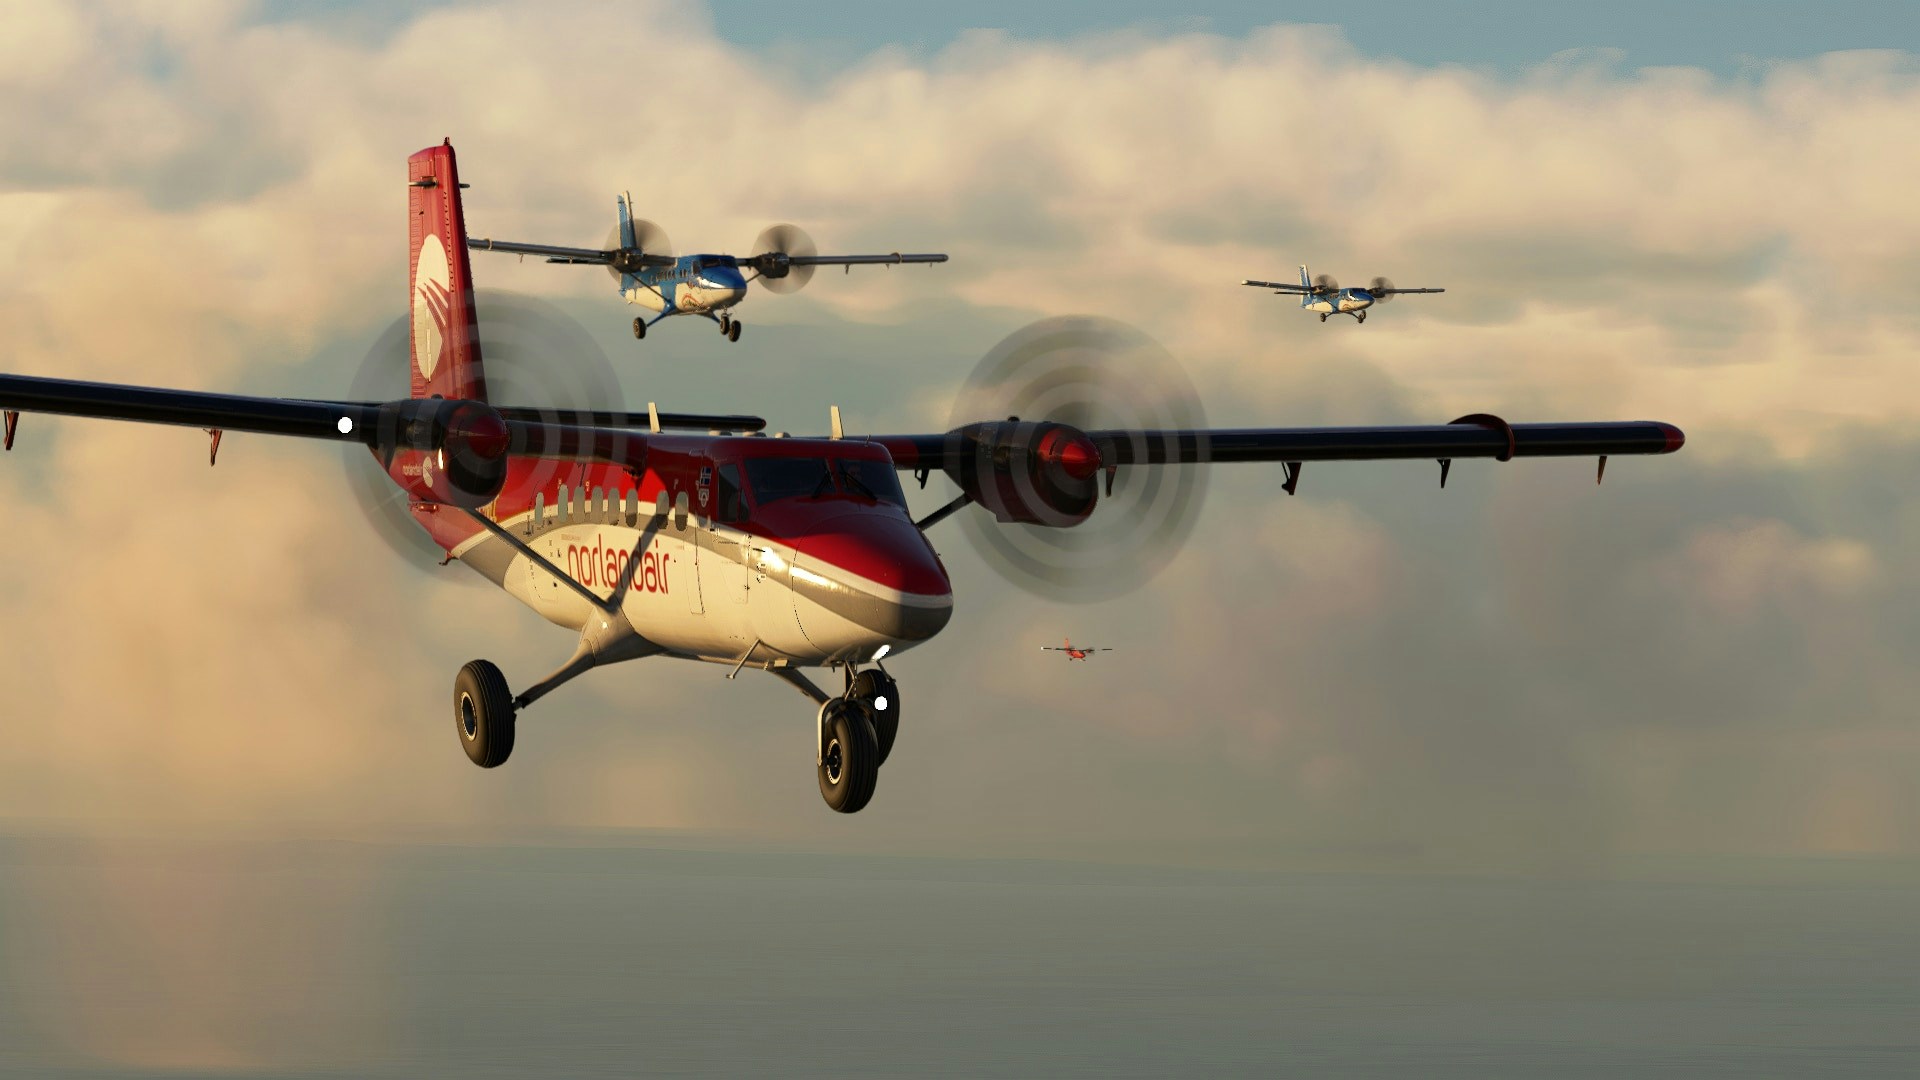 Microsoft Flight Simulator - Release Date and Price Confirmed